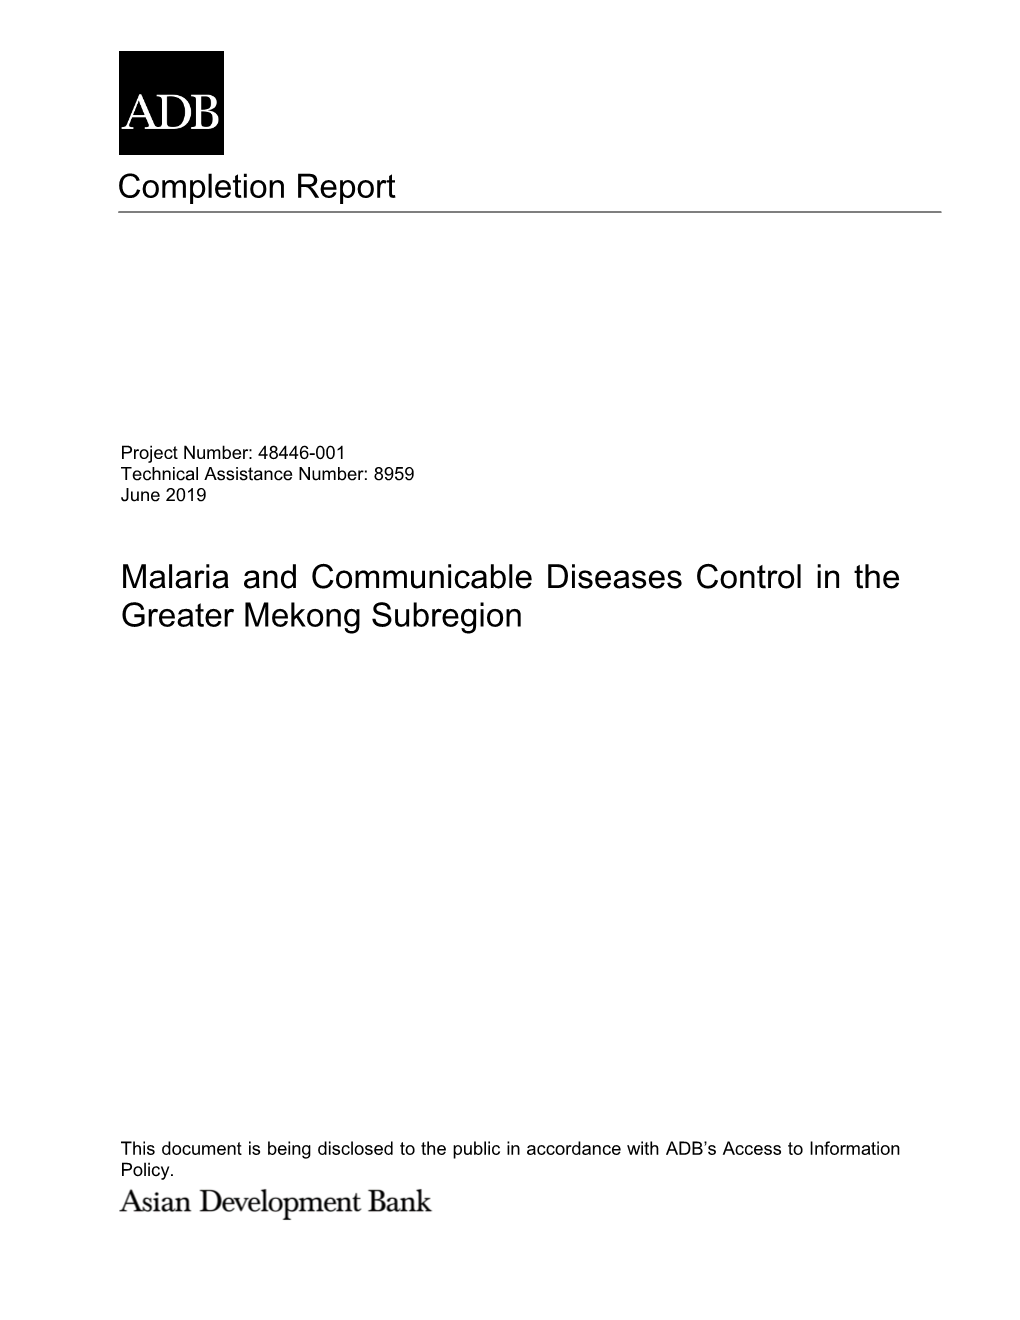 Malaria and Communicable Diseases Control in the Greater Mekong